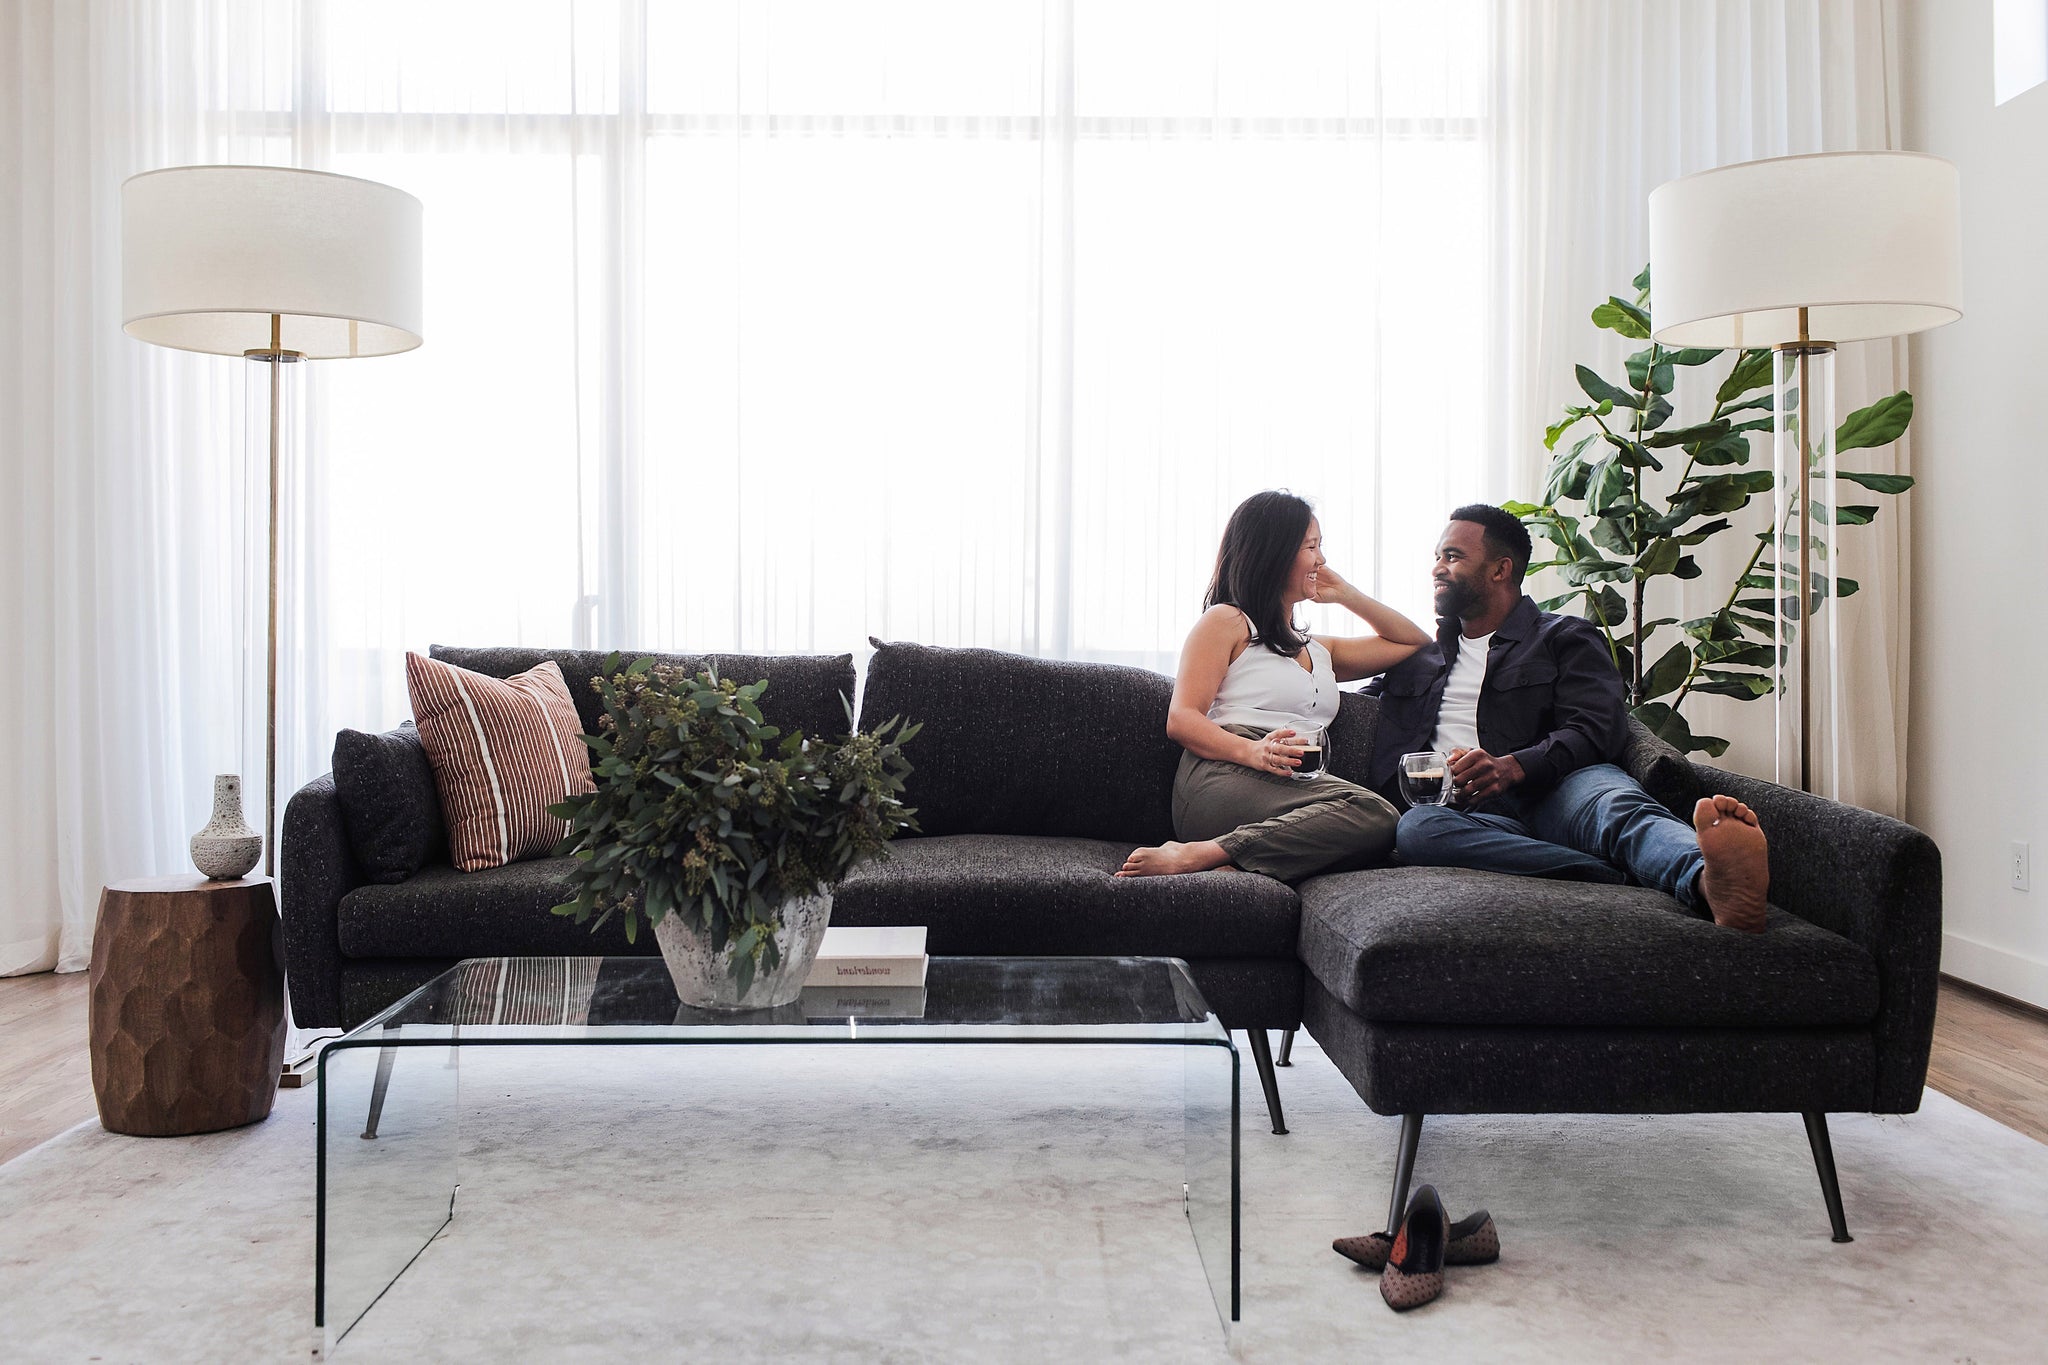 park sectional sofa shown in charcoal with gold legs with black legs right facing